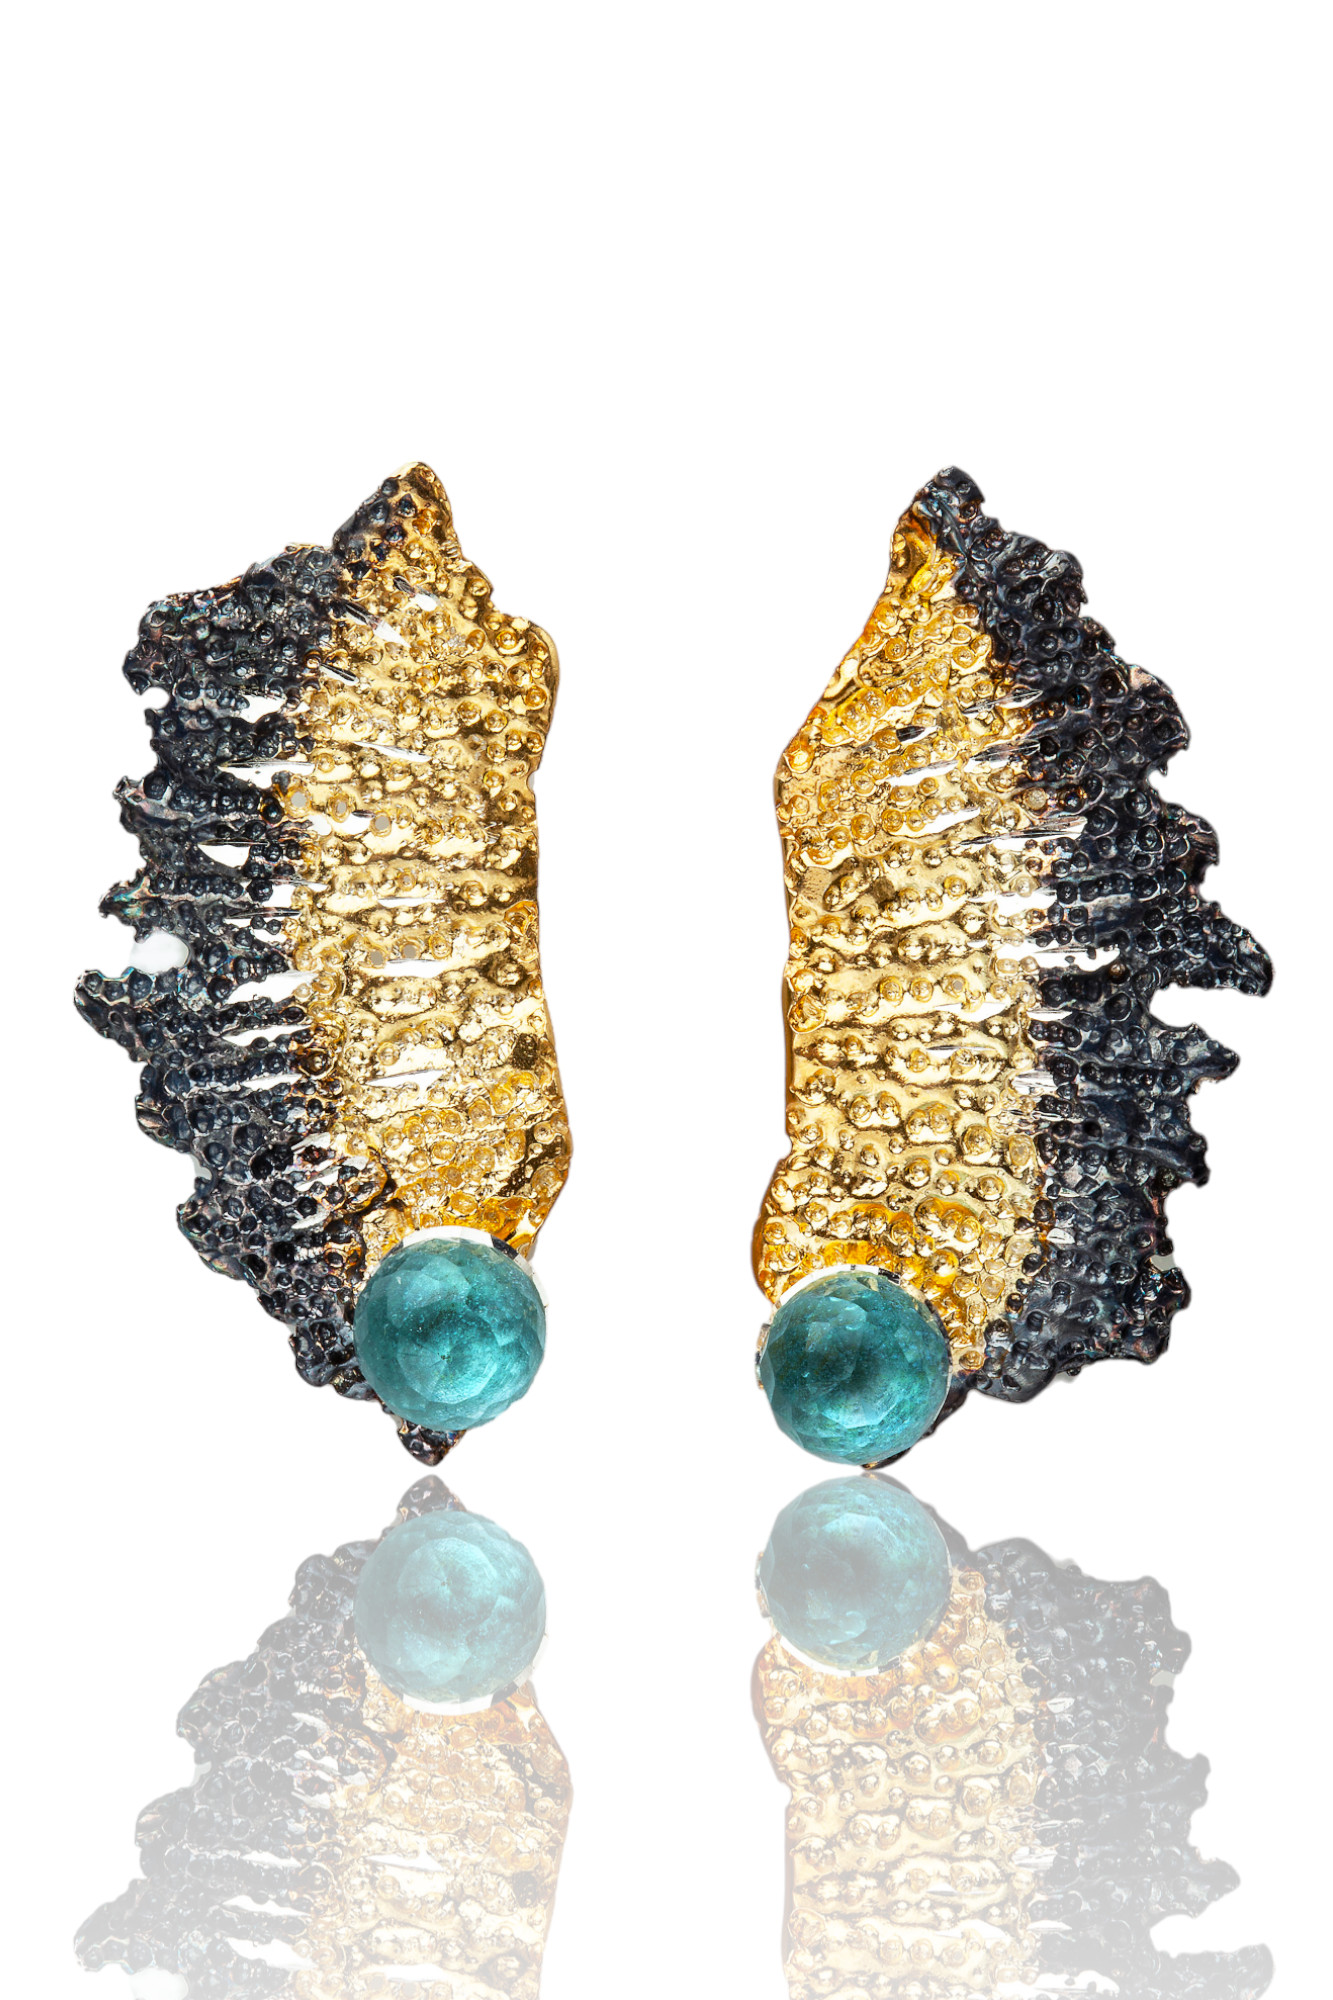 Aqua marine textured silver earring, gold and black rhodium plated